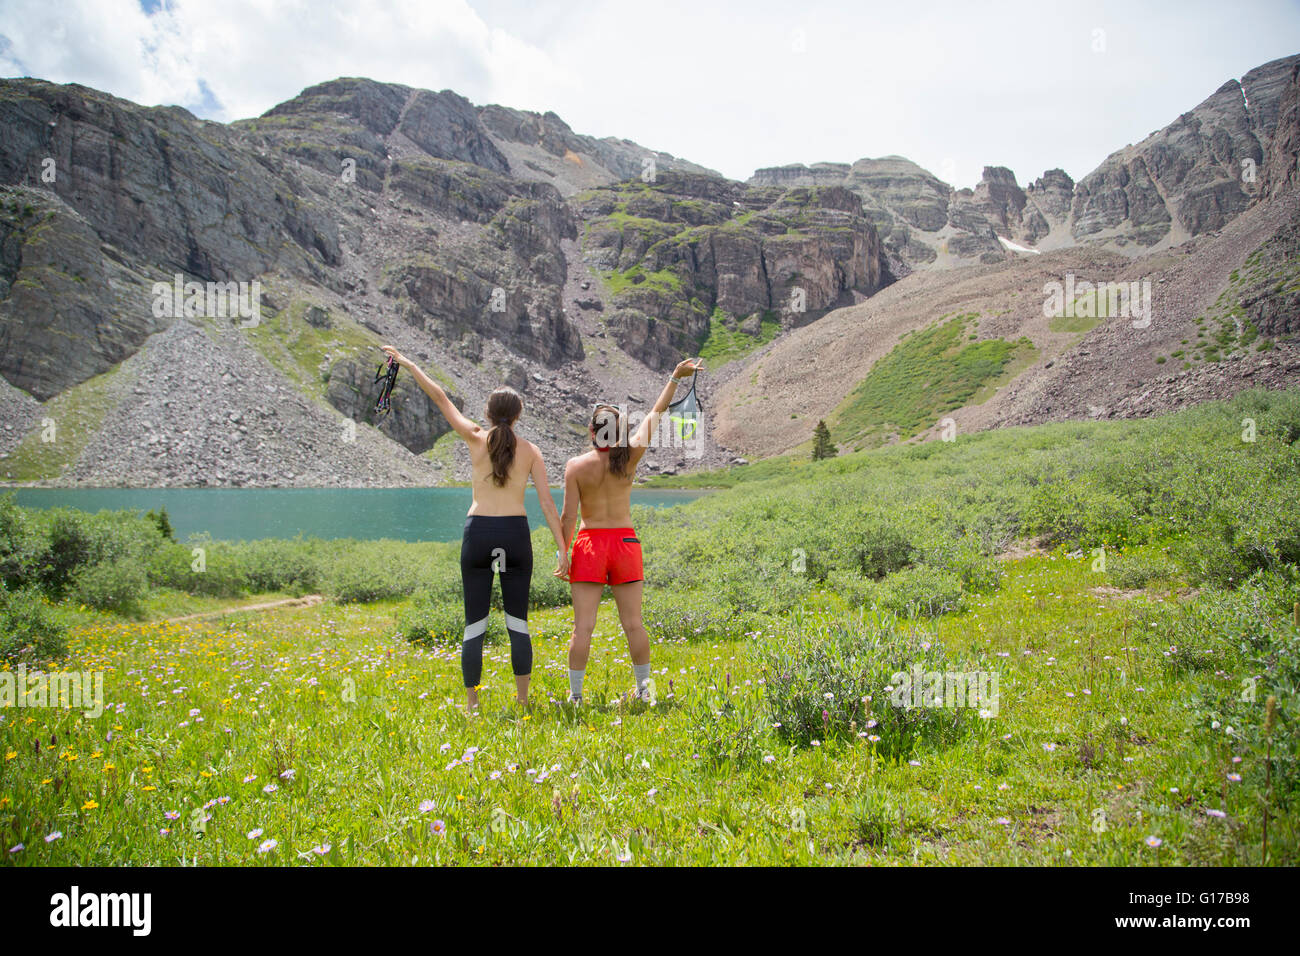 Women baring chest, Cathedral Lake, Aspen, Colorado Stock Photo